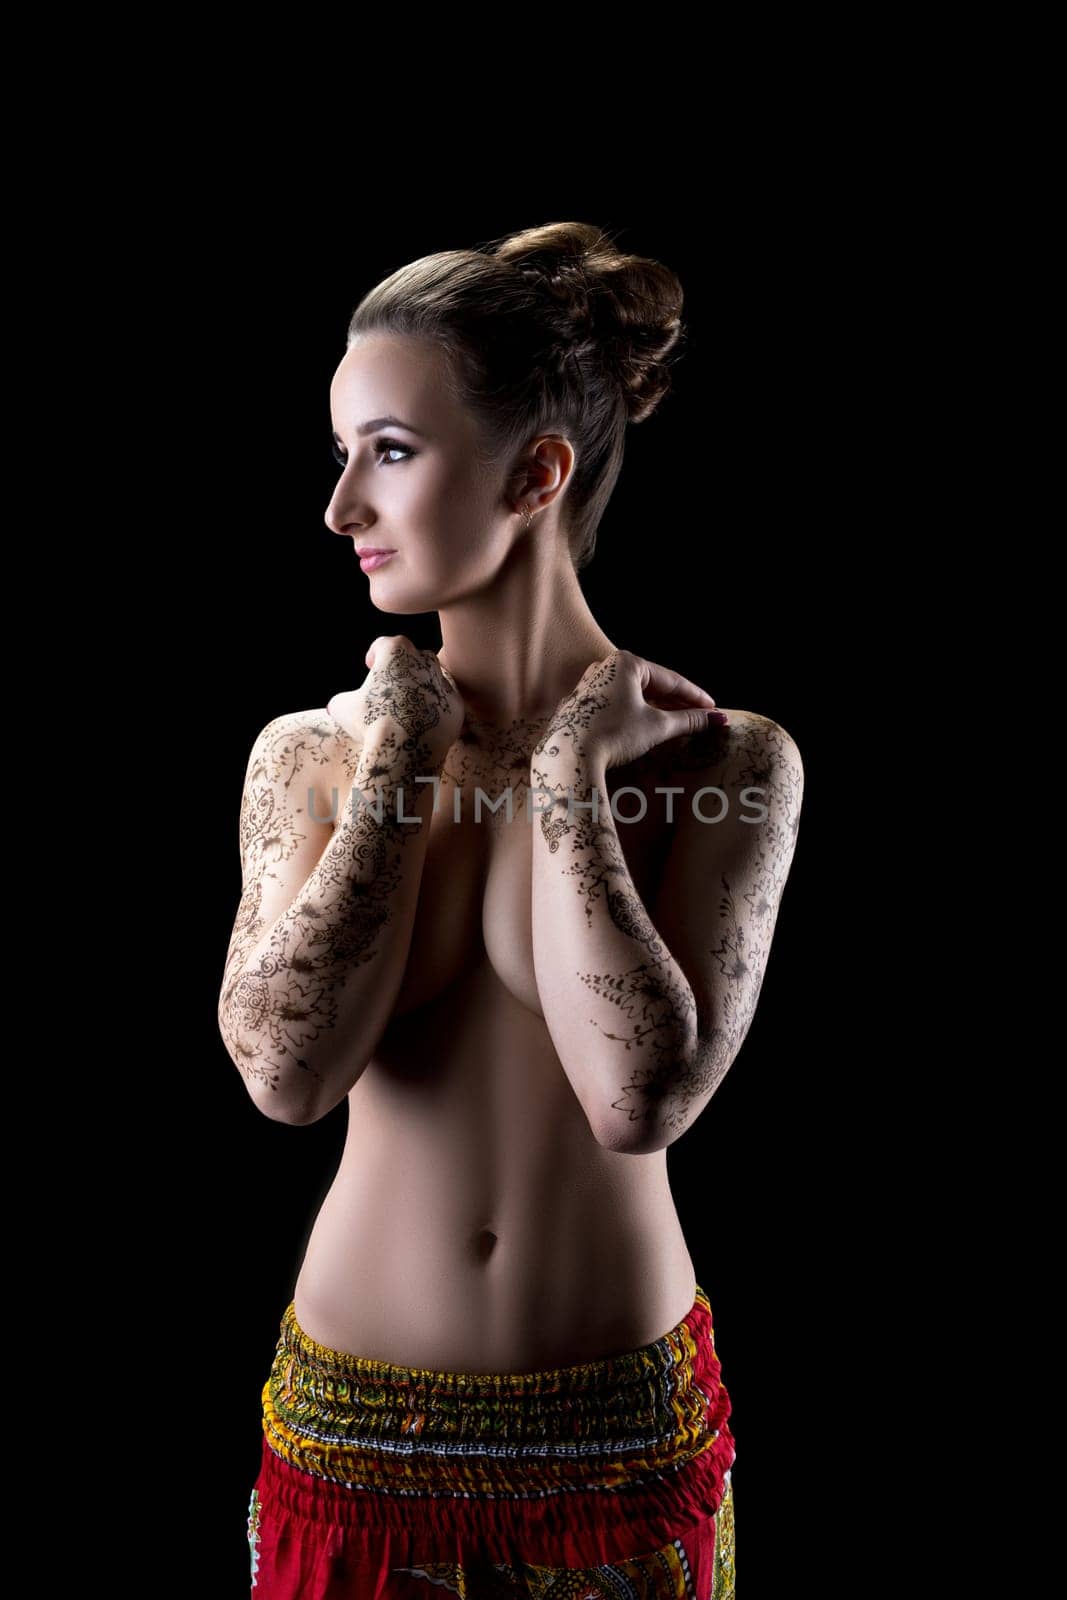 Image of sensual topless woman with henna pattern on her hands